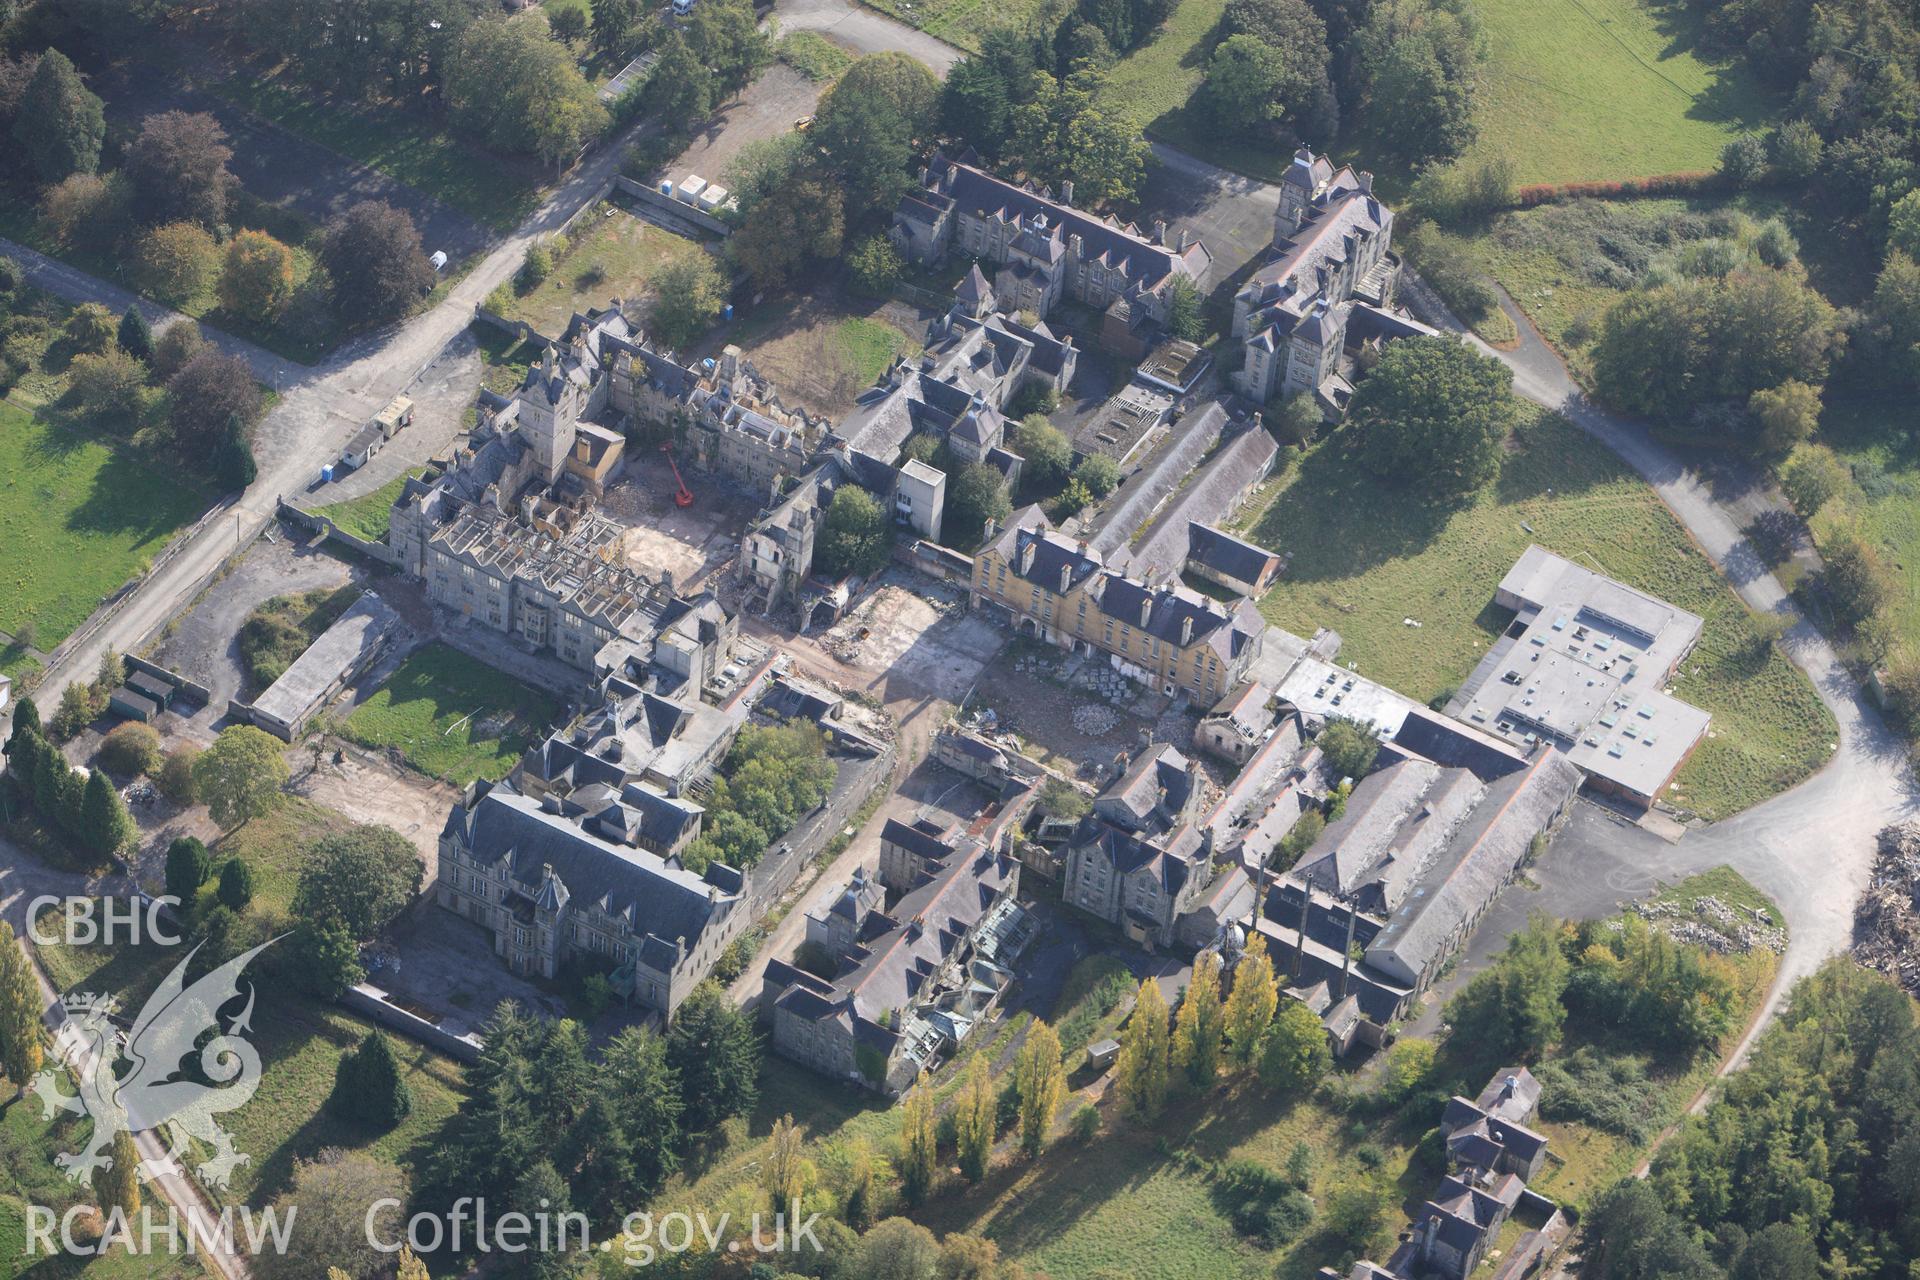 RCAHMW colour oblique photograph of North Wales Counties Hospital, Denbigh. Taken by Toby Driver on 04/10/2011.